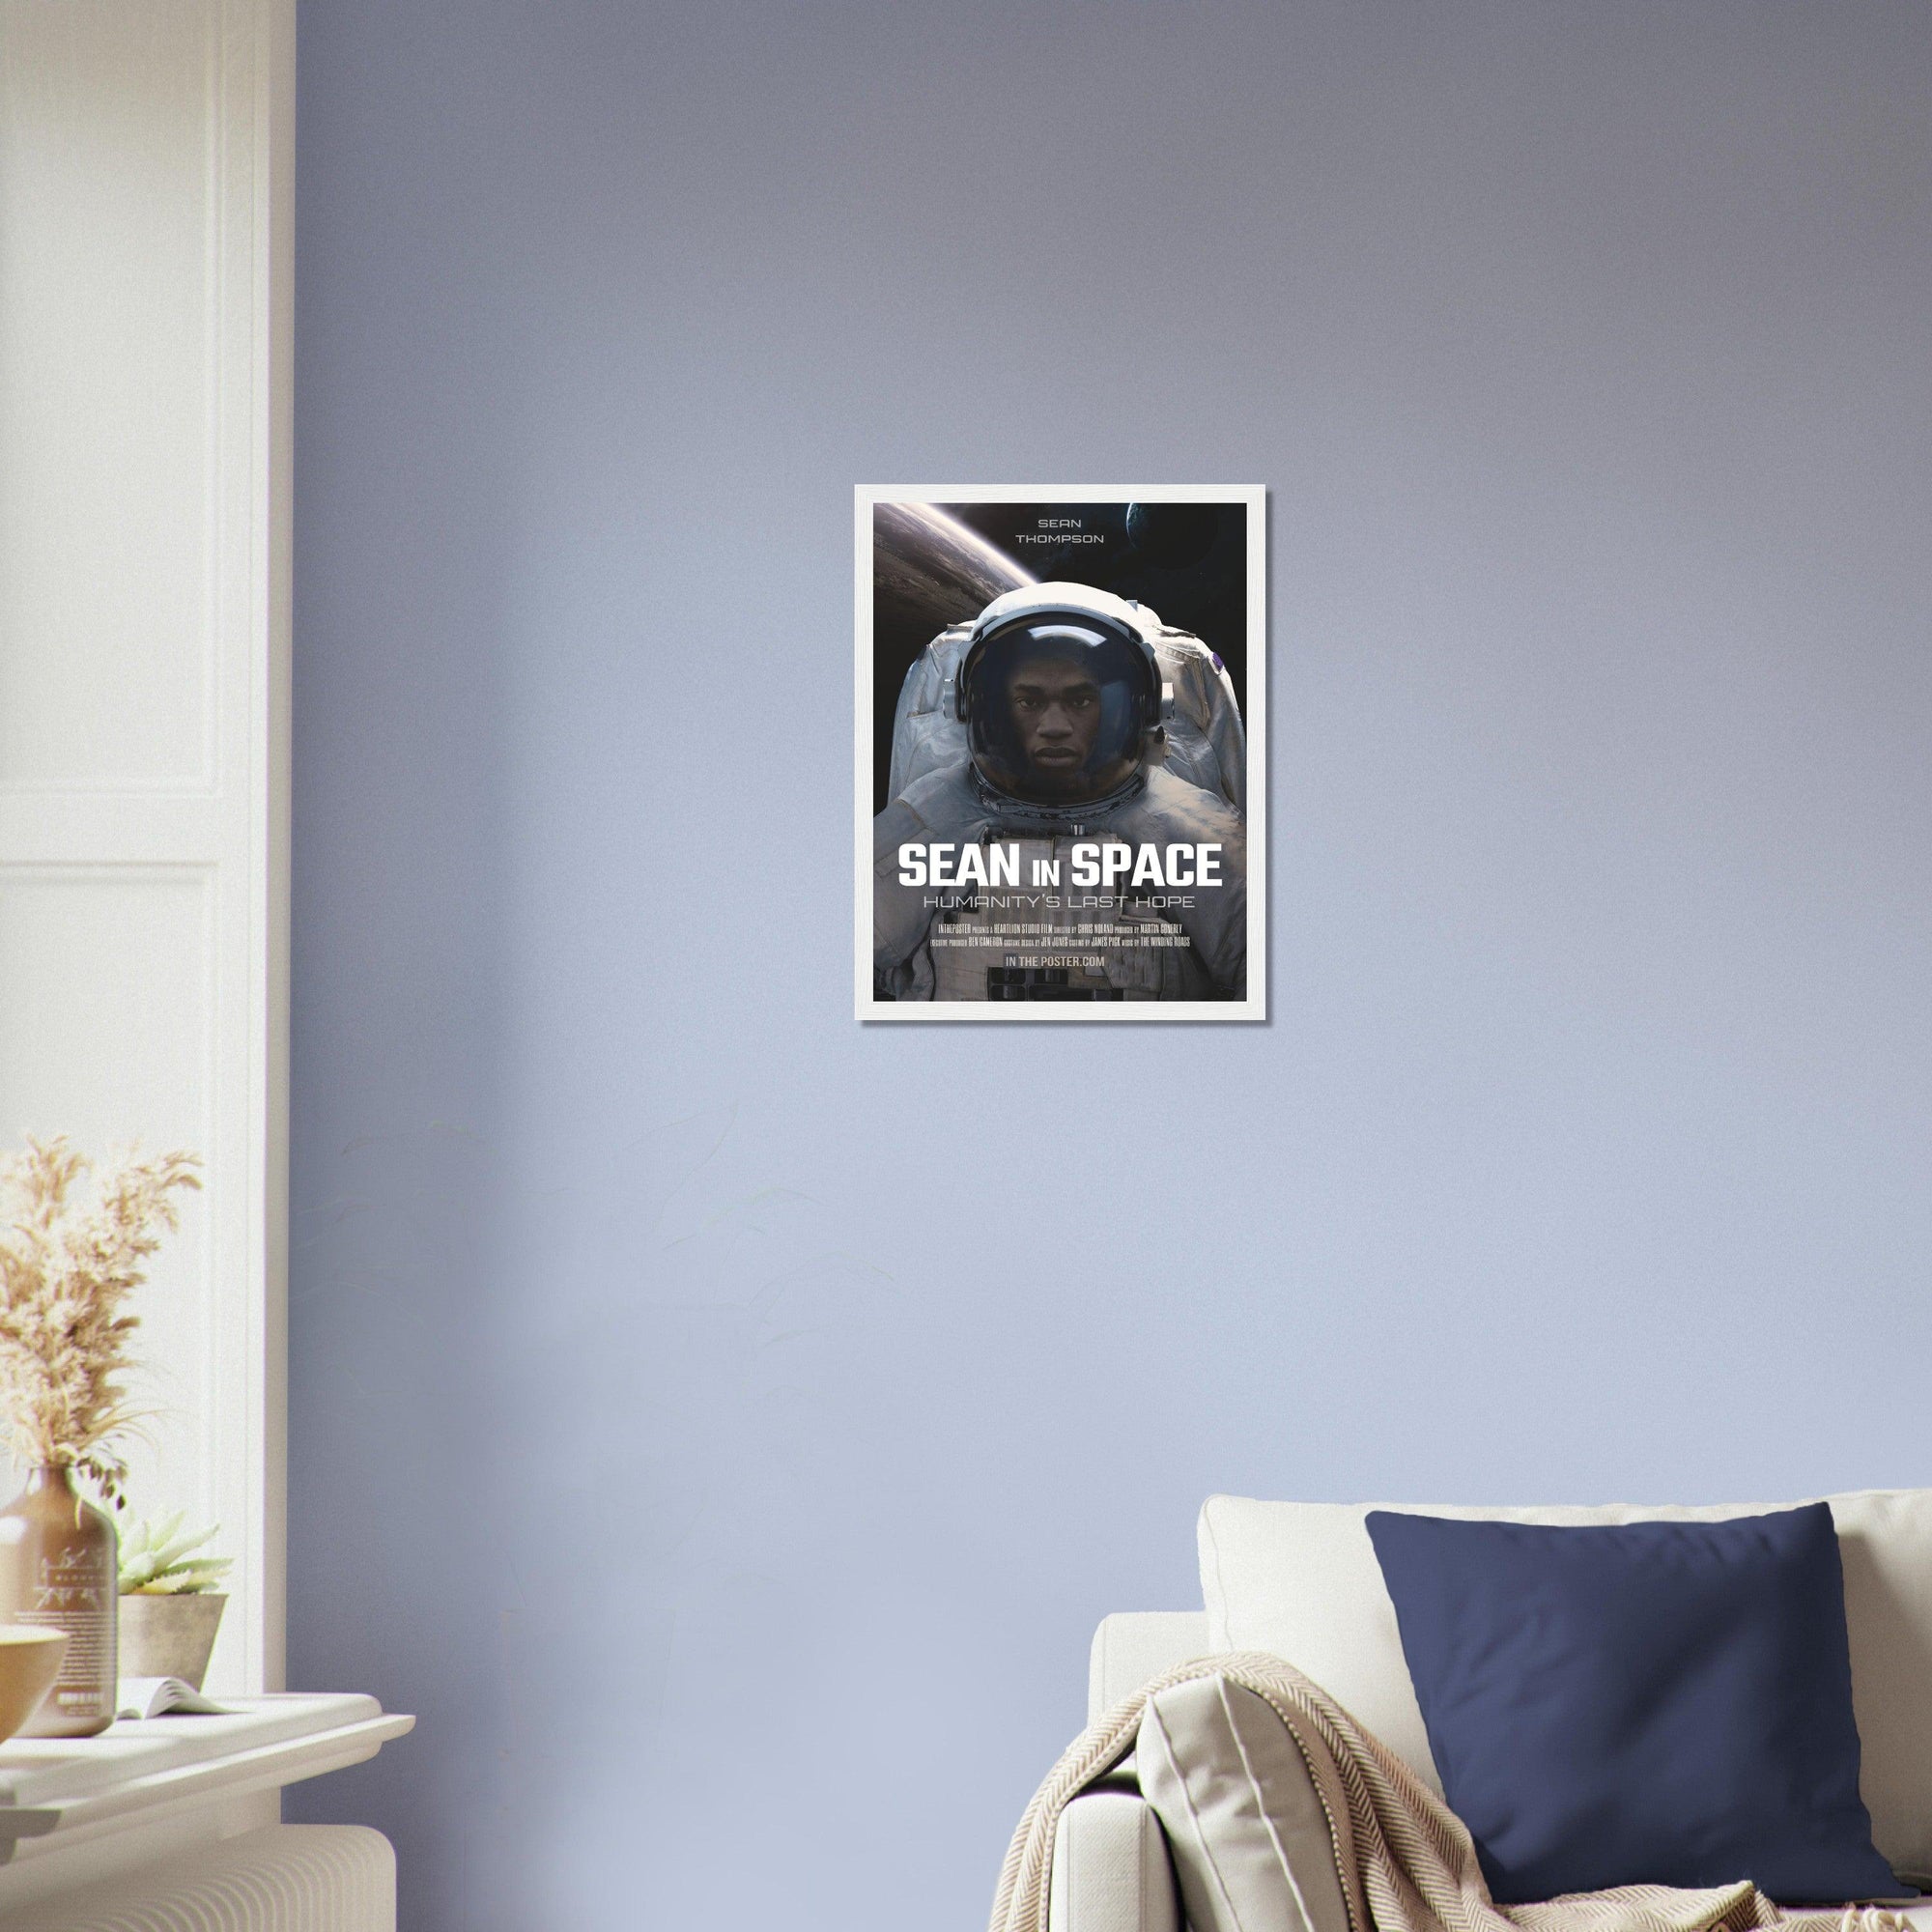 An astronaut sci-fi movie poster design in a small white frame on a blue wall above a designer sofa